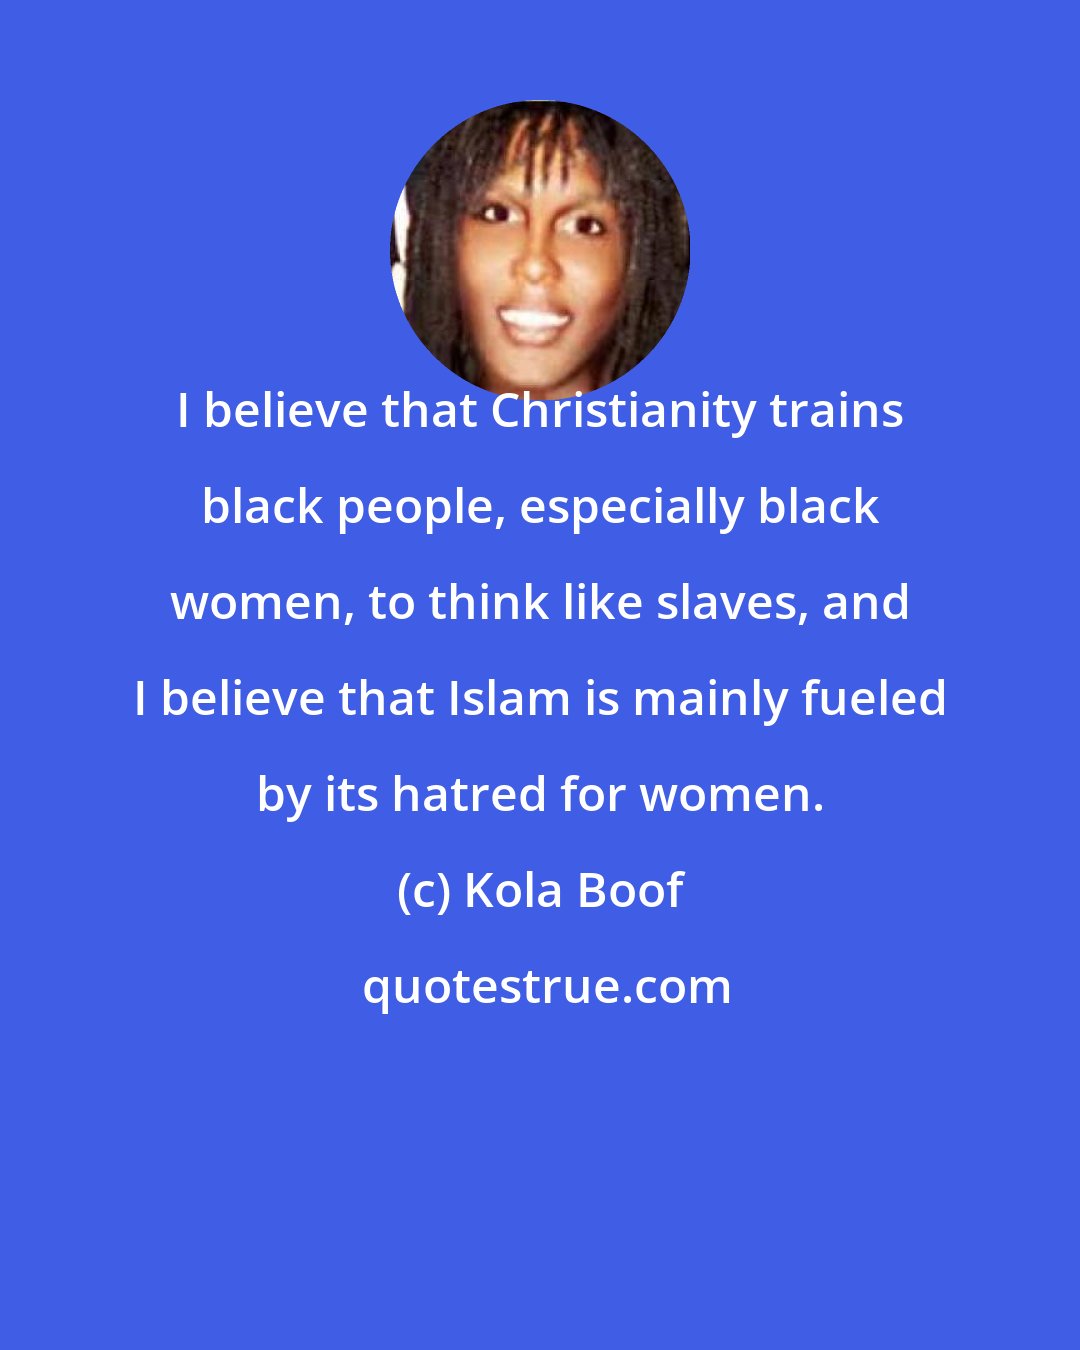 Kola Boof: I believe that Christianity trains black people, especially black women, to think like slaves, and I believe that Islam is mainly fueled by its hatred for women.